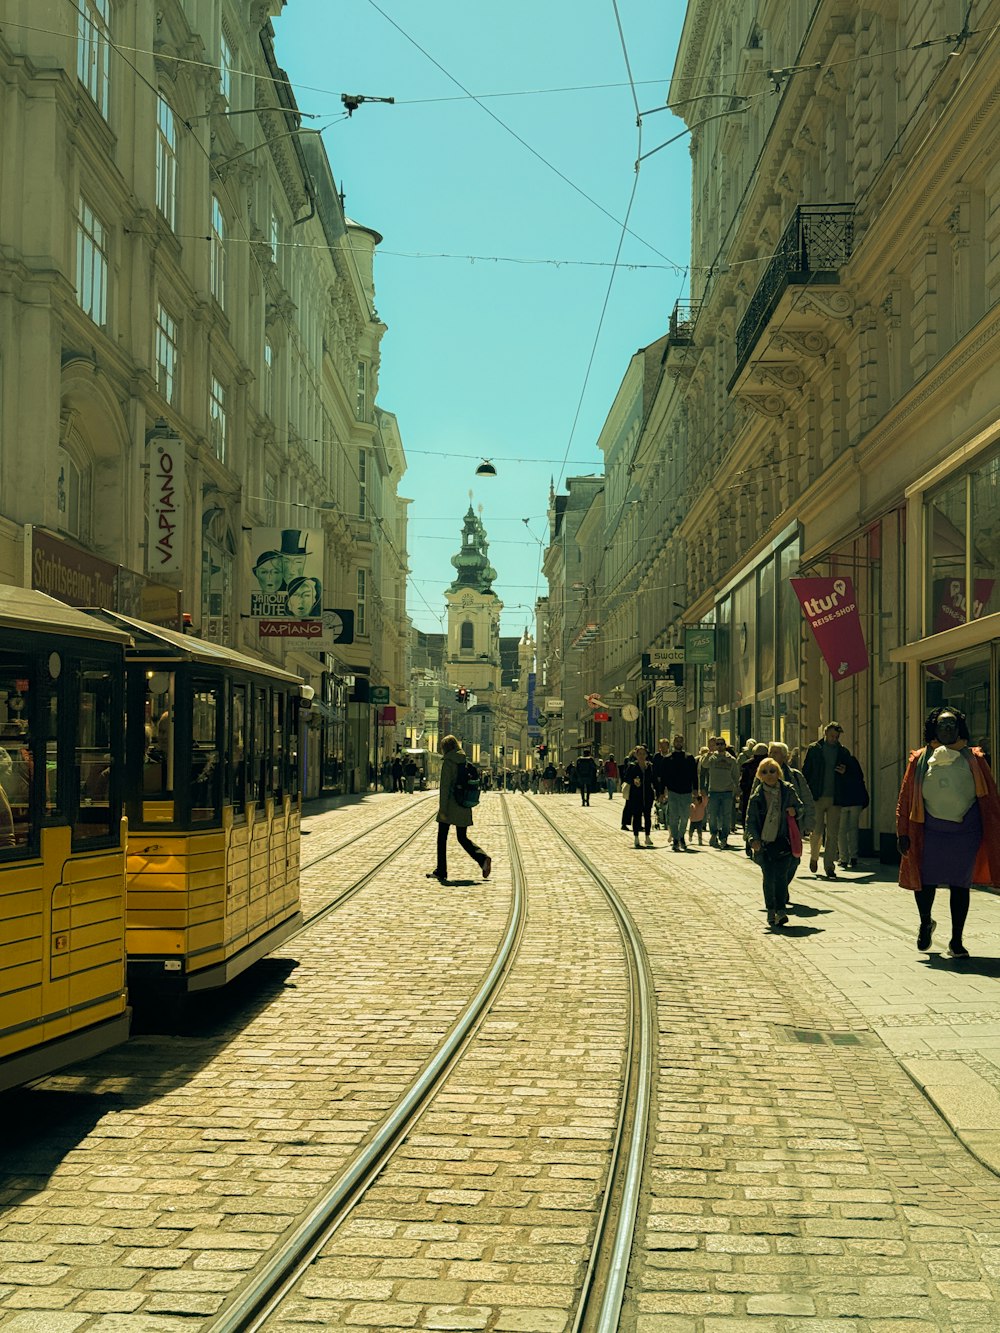 a yellow trolley on a city street with people walking around